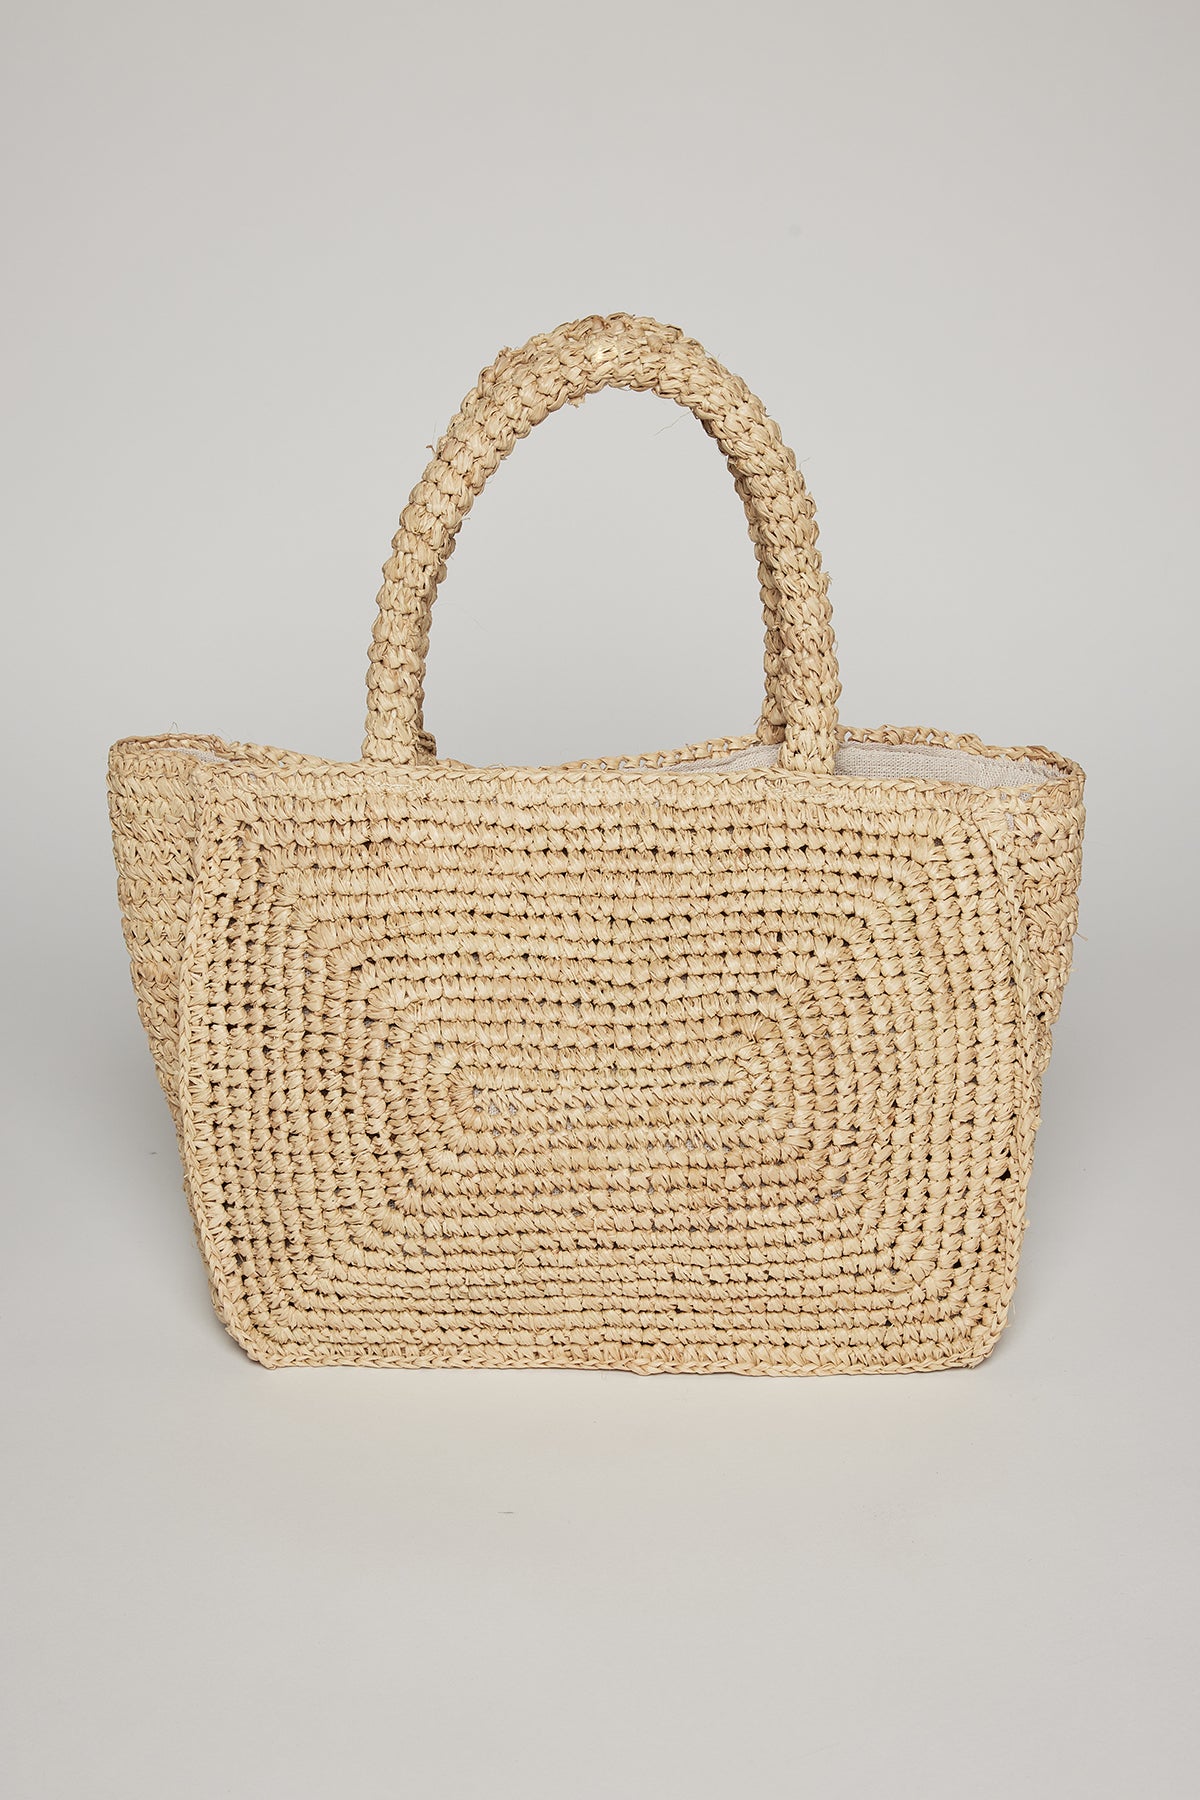 TINA STRAW TOTE BAG by Velvet by Graham & Spencer, with a rectangular shape and sturdy handles, displayed against a neutral background.-36571459059905